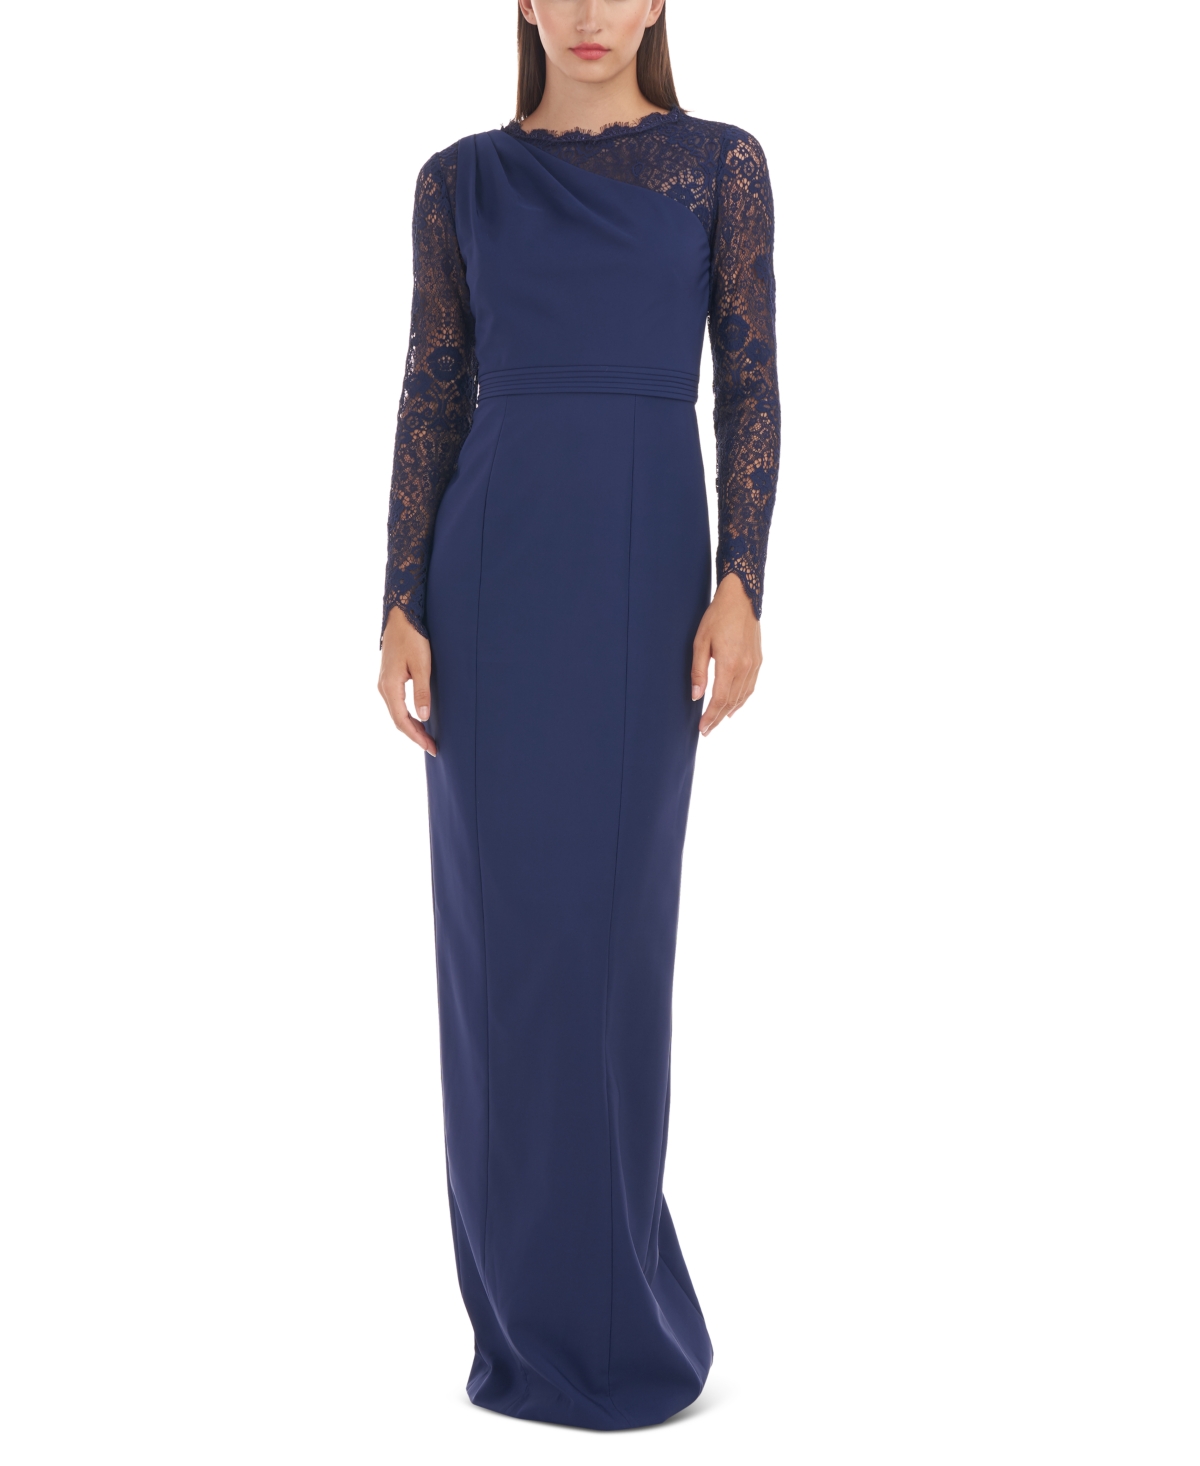 Js Collections Women's Stretch Crepe Lace-Sleeve Gown